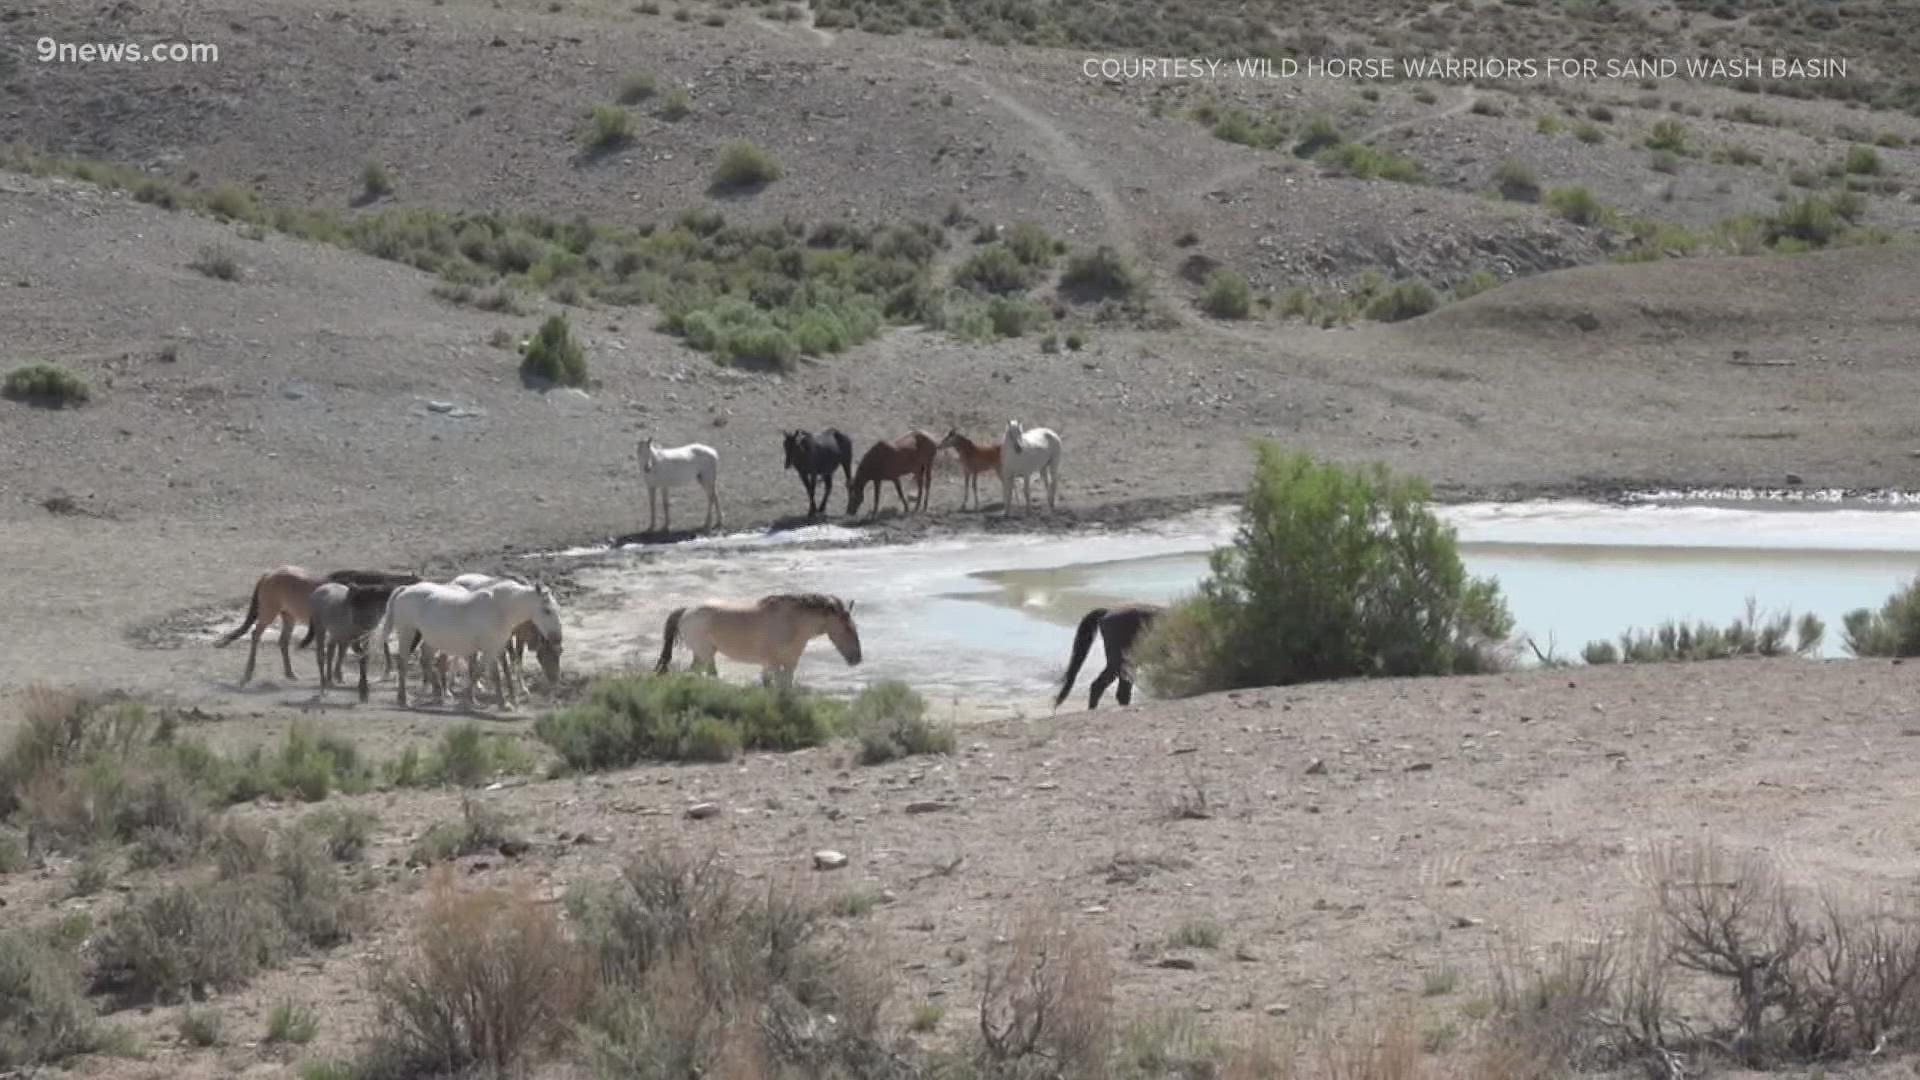 Agency states that drought conditions have taken away too much water supply to sustain horses in Sand Wash Basin.